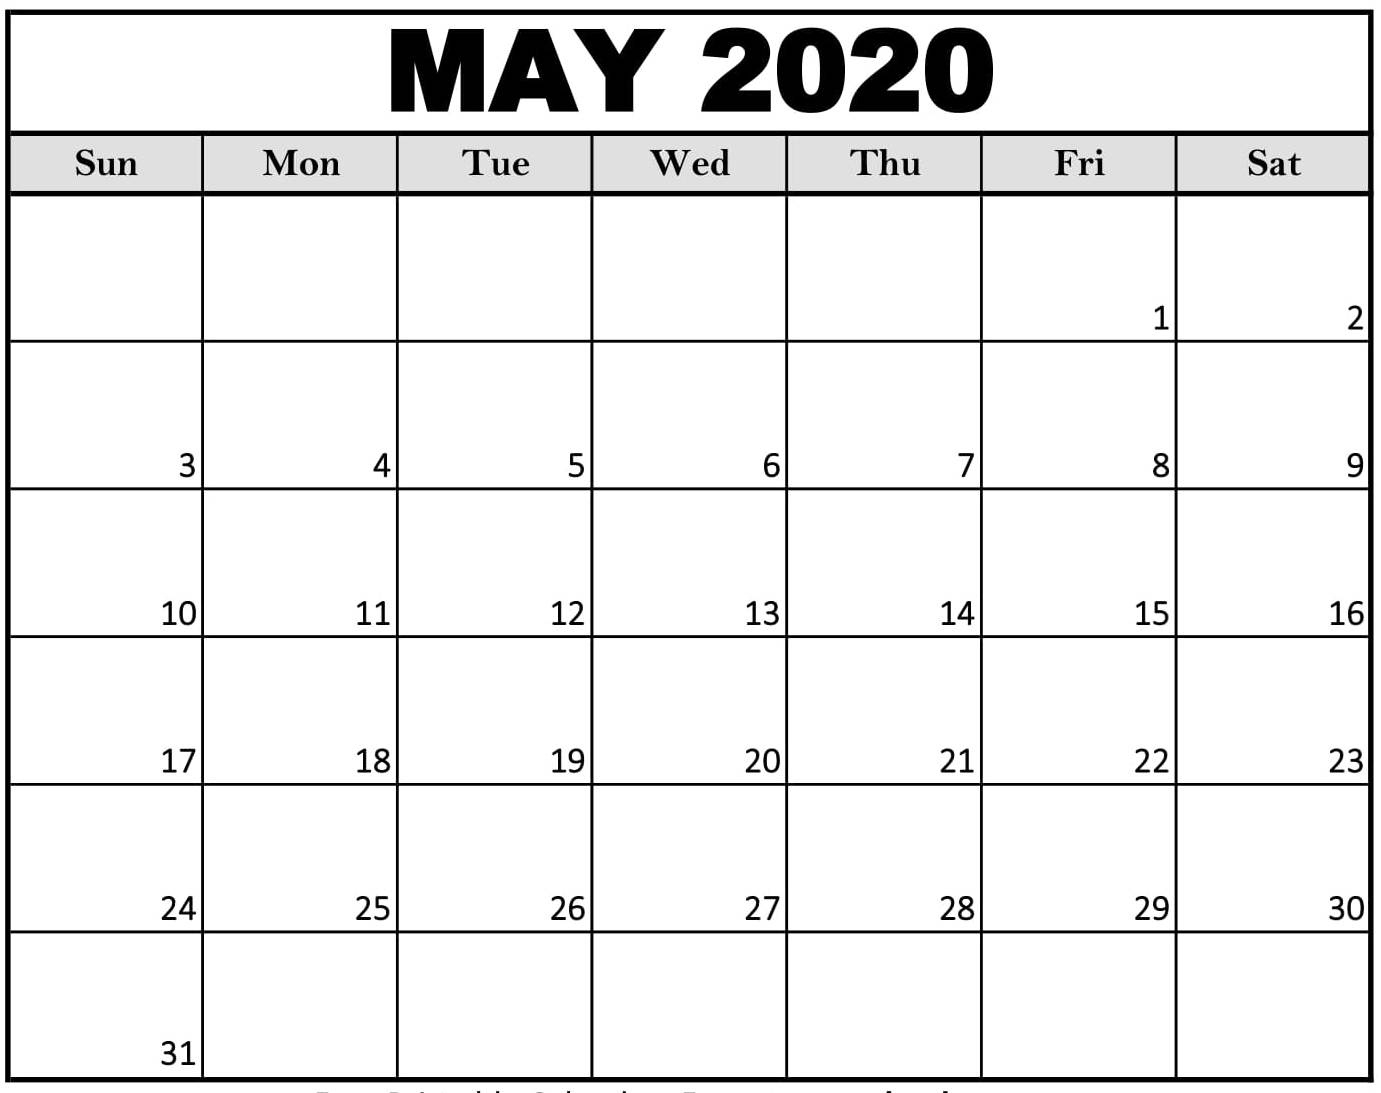 Monthly May 2020 Calendar Template - 2019 Calendars For Calendar Template Big Boxes